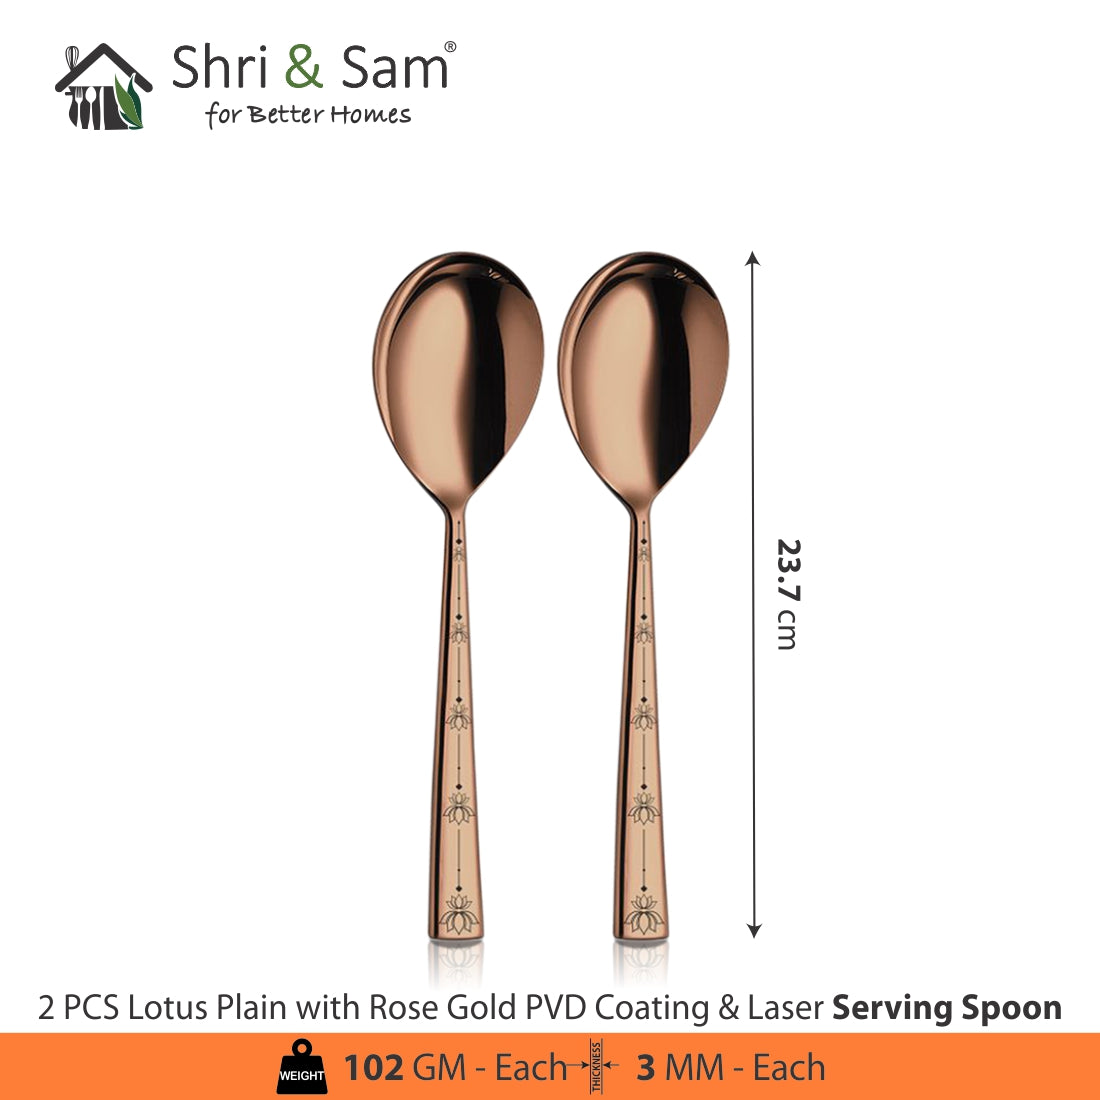 Stainless Steel Cutlery with Rose Gold PVD Coating & Laser Lotus Plain